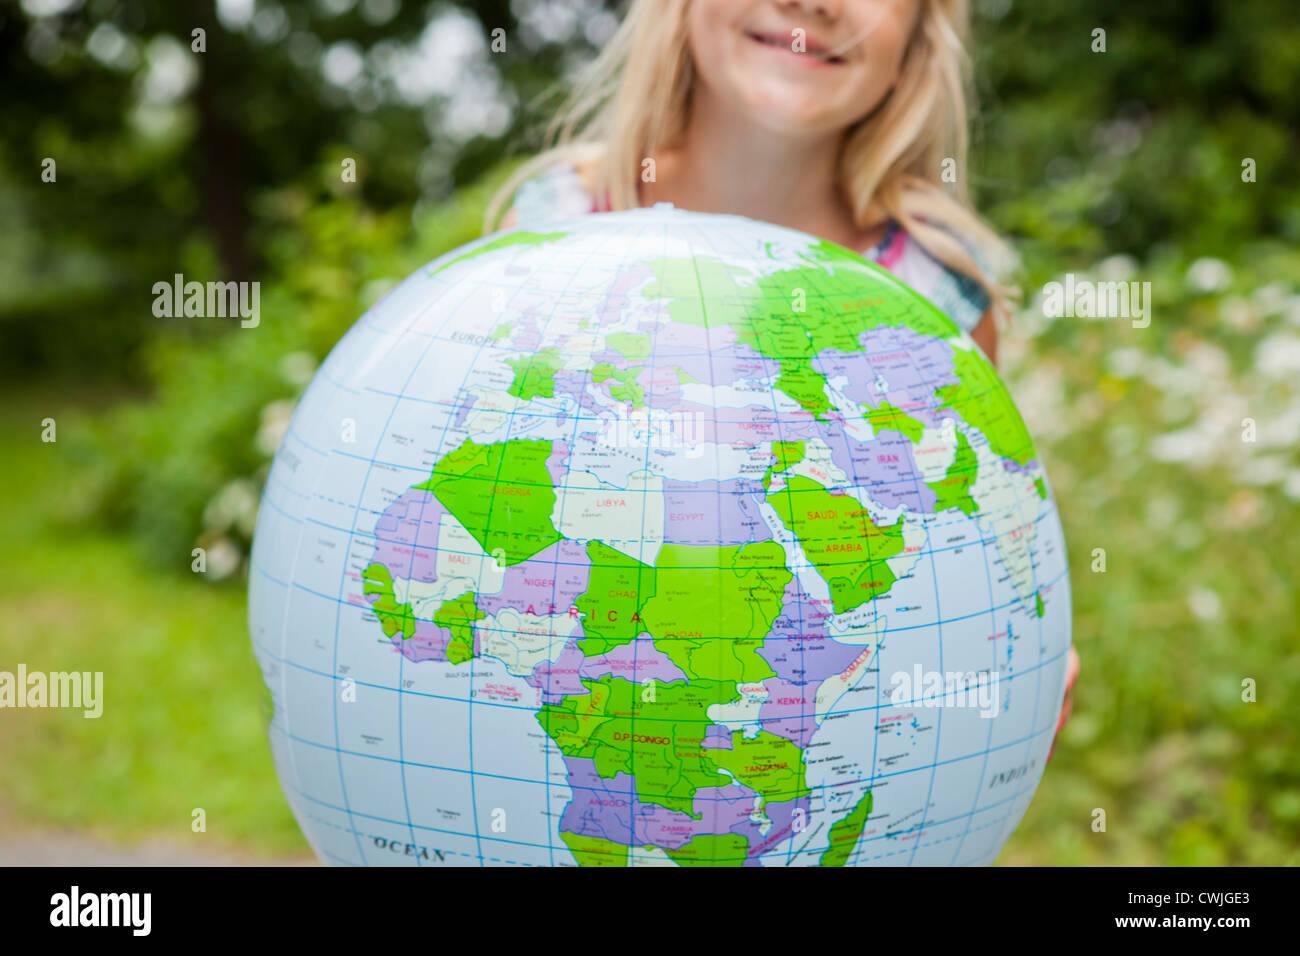 Little girl holding a colorful earth globe outdoors Stock Photo